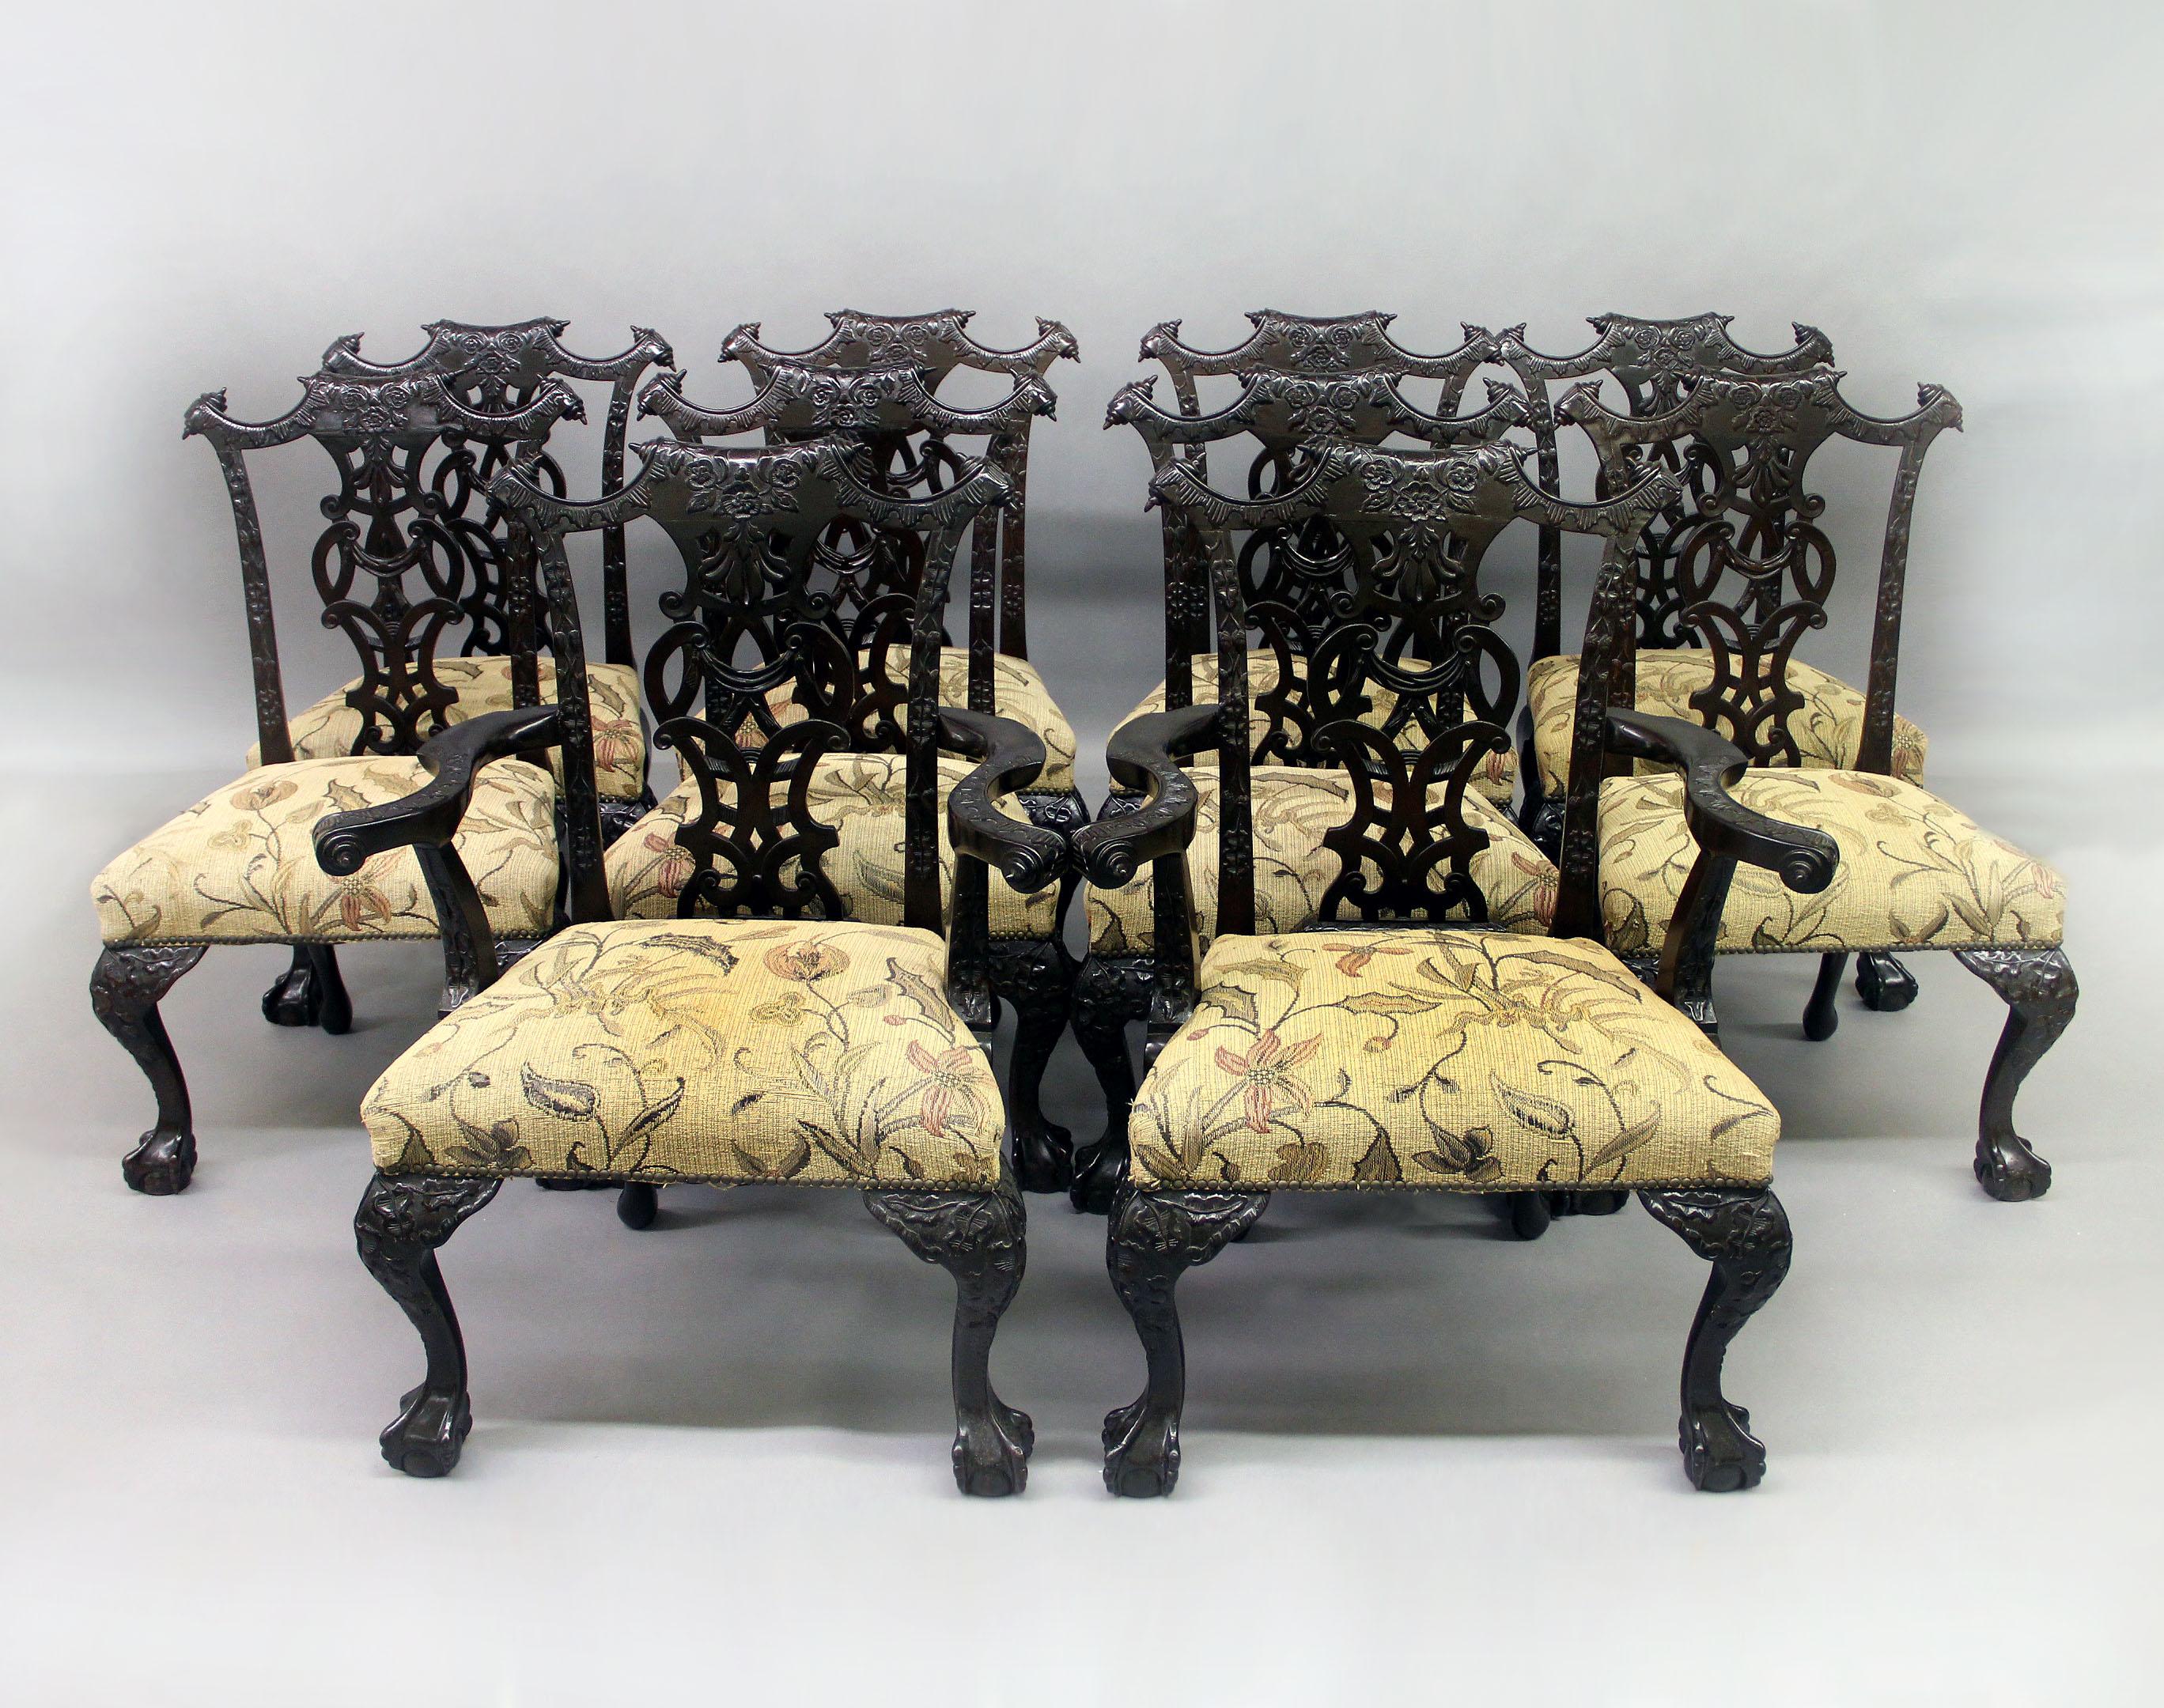 A fine set of ten late 19th century Chippendale style dining chairs

Comprising of two arm and eight side chairs.

The intertwined backs carved with roses and beautiful foliate designs, the top corners with paper scrolls. The serpentine arms